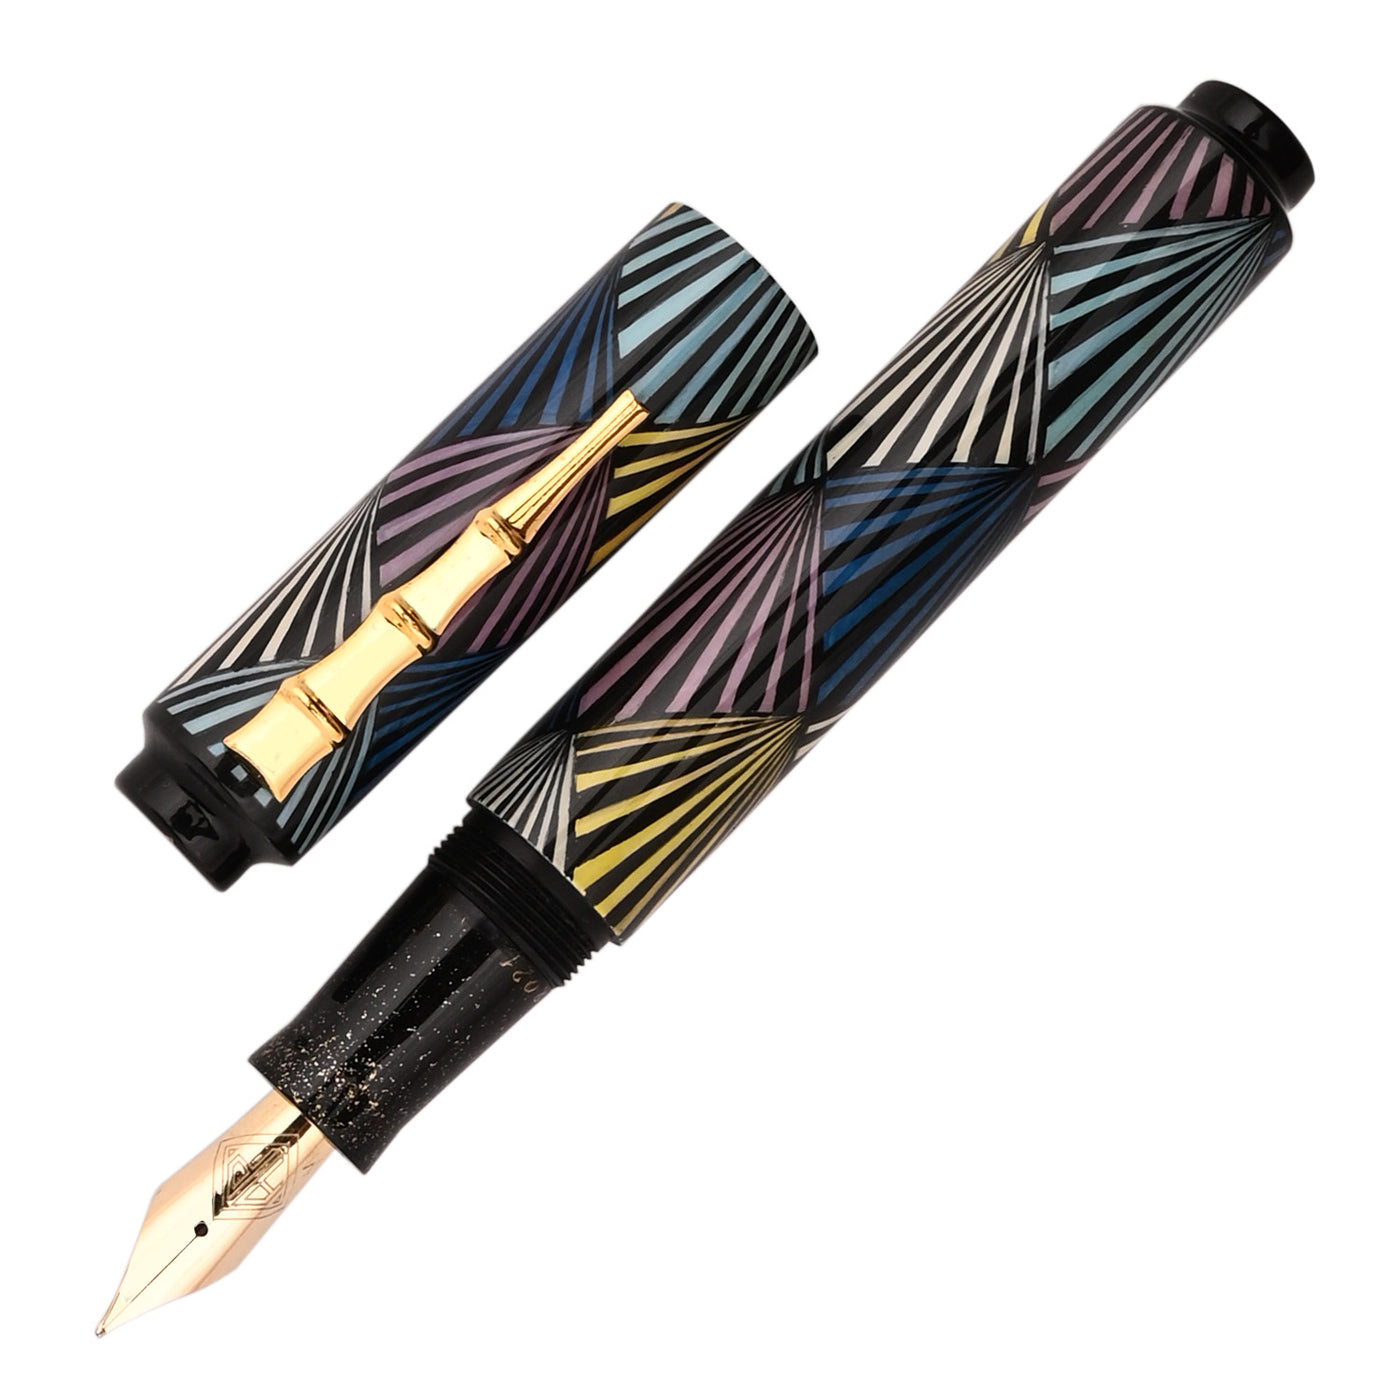 AP Limited Editions Russian Lacquer Art Fountain Pen - An Ode to Art Deco 1